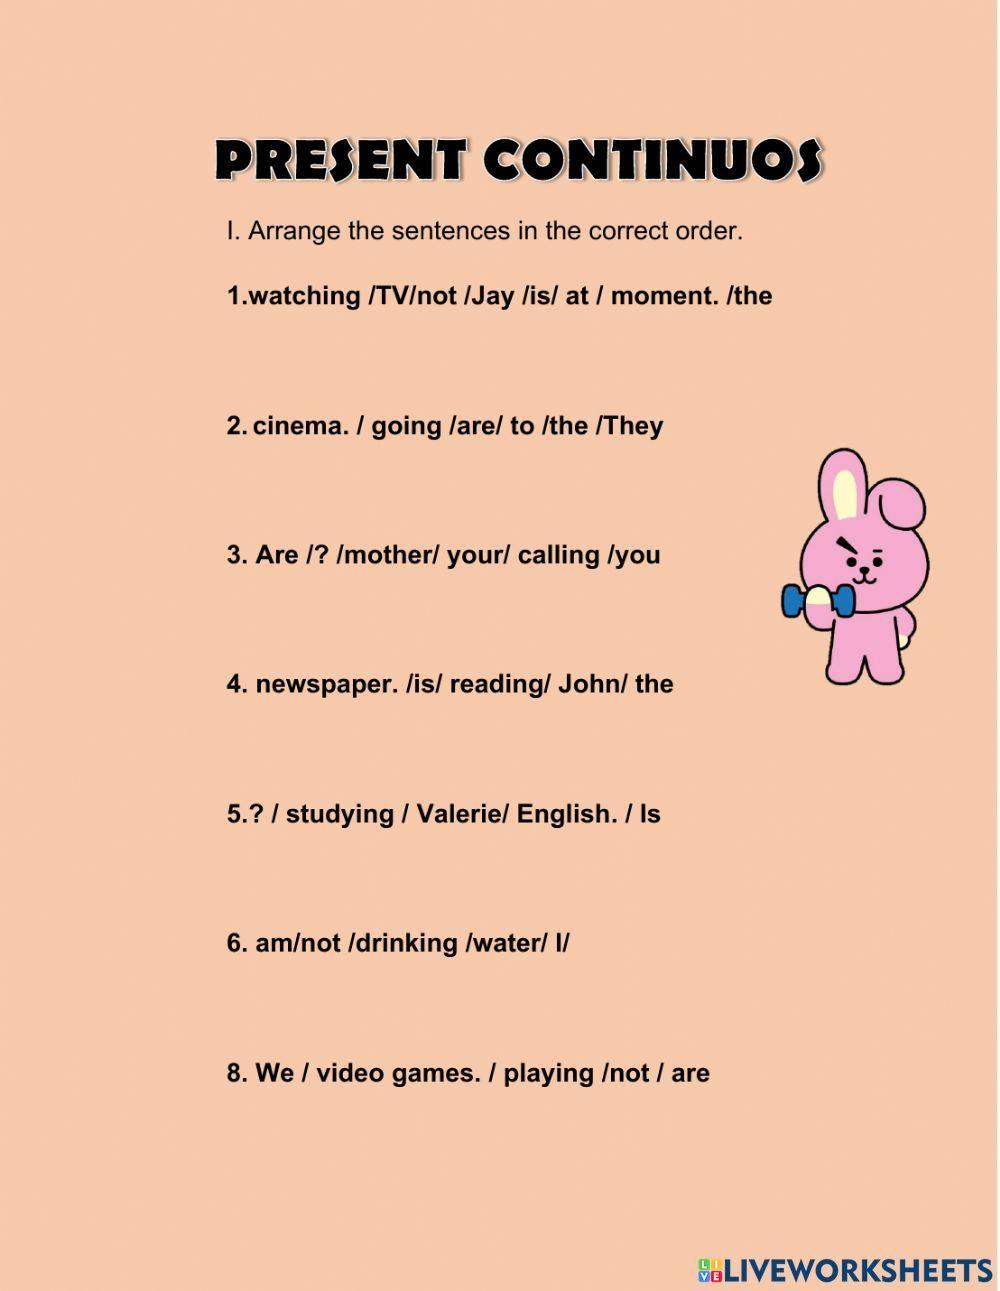 Present continuos-ing and verb